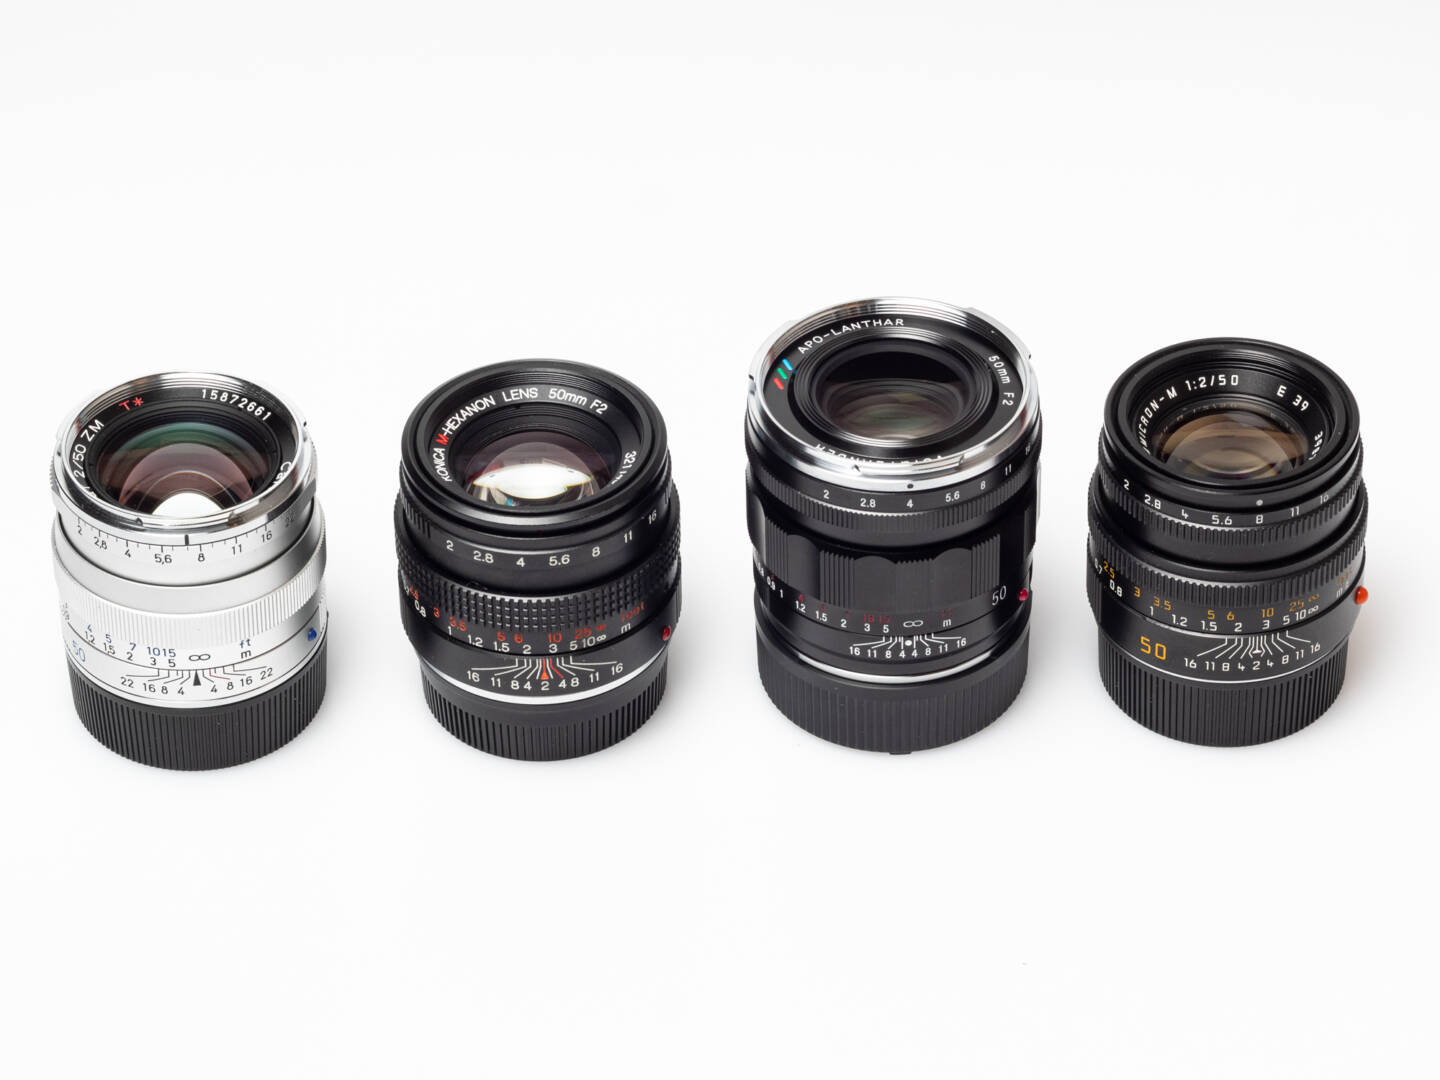 Zeiss Planar 50/2 (left) and three alternatives of the same focal length and speed: Konica M-Hexanon 50/2, Voigtländer Apo-Lanthar 50/2, Leica Summicron 50 (from left to right). But what about…?